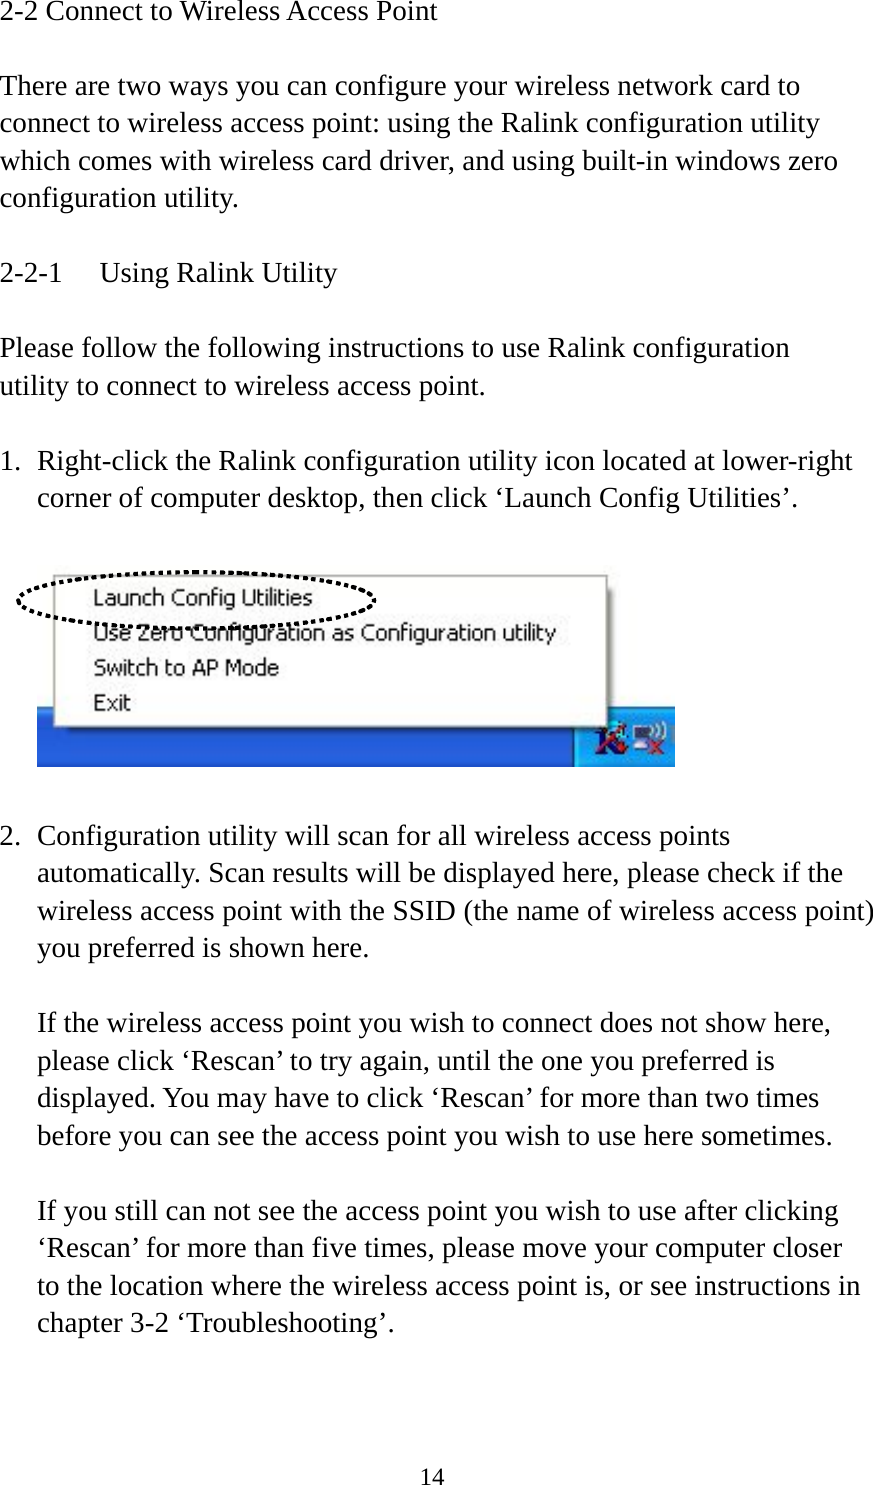  142-2 Connect to Wireless Access Point  There are two ways you can configure your wireless network card to connect to wireless access point: using the Ralink configuration utility which comes with wireless card driver, and using built-in windows zero configuration utility.  2-2-1  Using Ralink Utility  Please follow the following instructions to use Ralink configuration utility to connect to wireless access point.  1. Right-click the Ralink configuration utility icon located at lower-right corner of computer desktop, then click ‘Launch Config Utilities’.    2. Configuration utility will scan for all wireless access points automatically. Scan results will be displayed here, please check if the wireless access point with the SSID (the name of wireless access point) you preferred is shown here.  If the wireless access point you wish to connect does not show here, please click ‘Rescan’ to try again, until the one you preferred is displayed. You may have to click ‘Rescan’ for more than two times before you can see the access point you wish to use here sometimes.  If you still can not see the access point you wish to use after clicking ‘Rescan’ for more than five times, please move your computer closer to the location where the wireless access point is, or see instructions in chapter 3-2 ‘Troubleshooting’.   